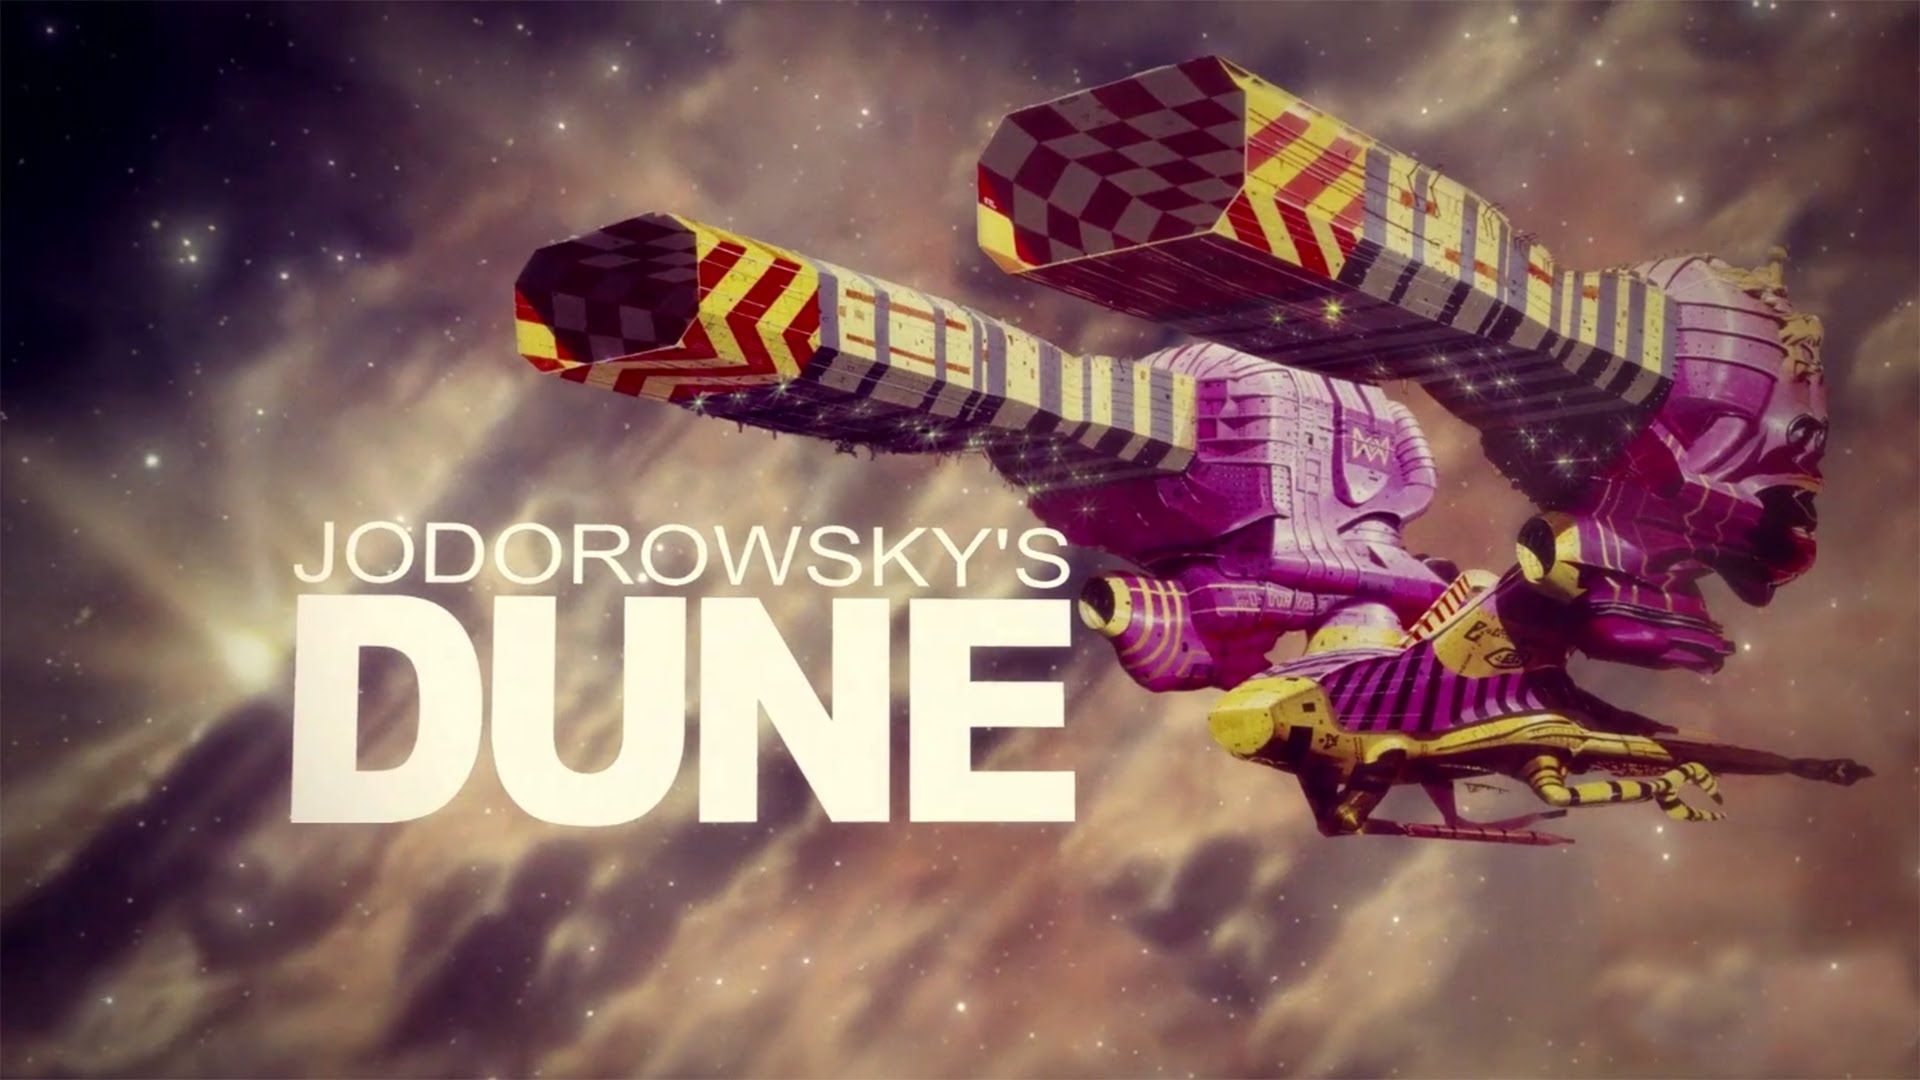 Jodorowsky's Dune wallpaper, Movie, HQ Jodorowsky's Dune picture